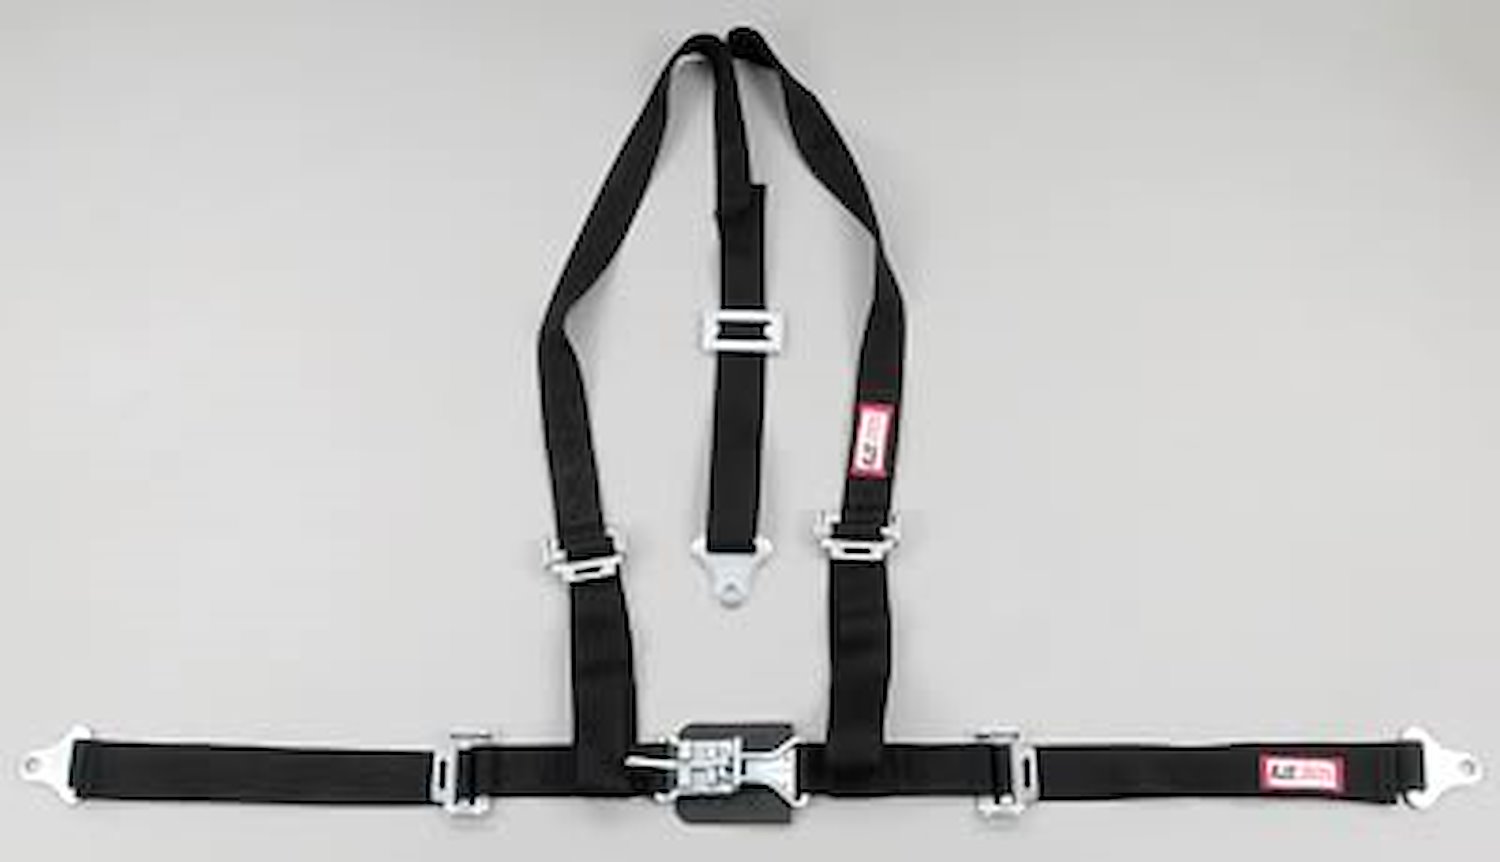 NON-SFI L&L HARNESS 2 PULL UP Lap Belt SEWN IN 2 S.H. Y FLOOR Mount w/STERNUM STRAP ALL WRAP ENDS BLUE